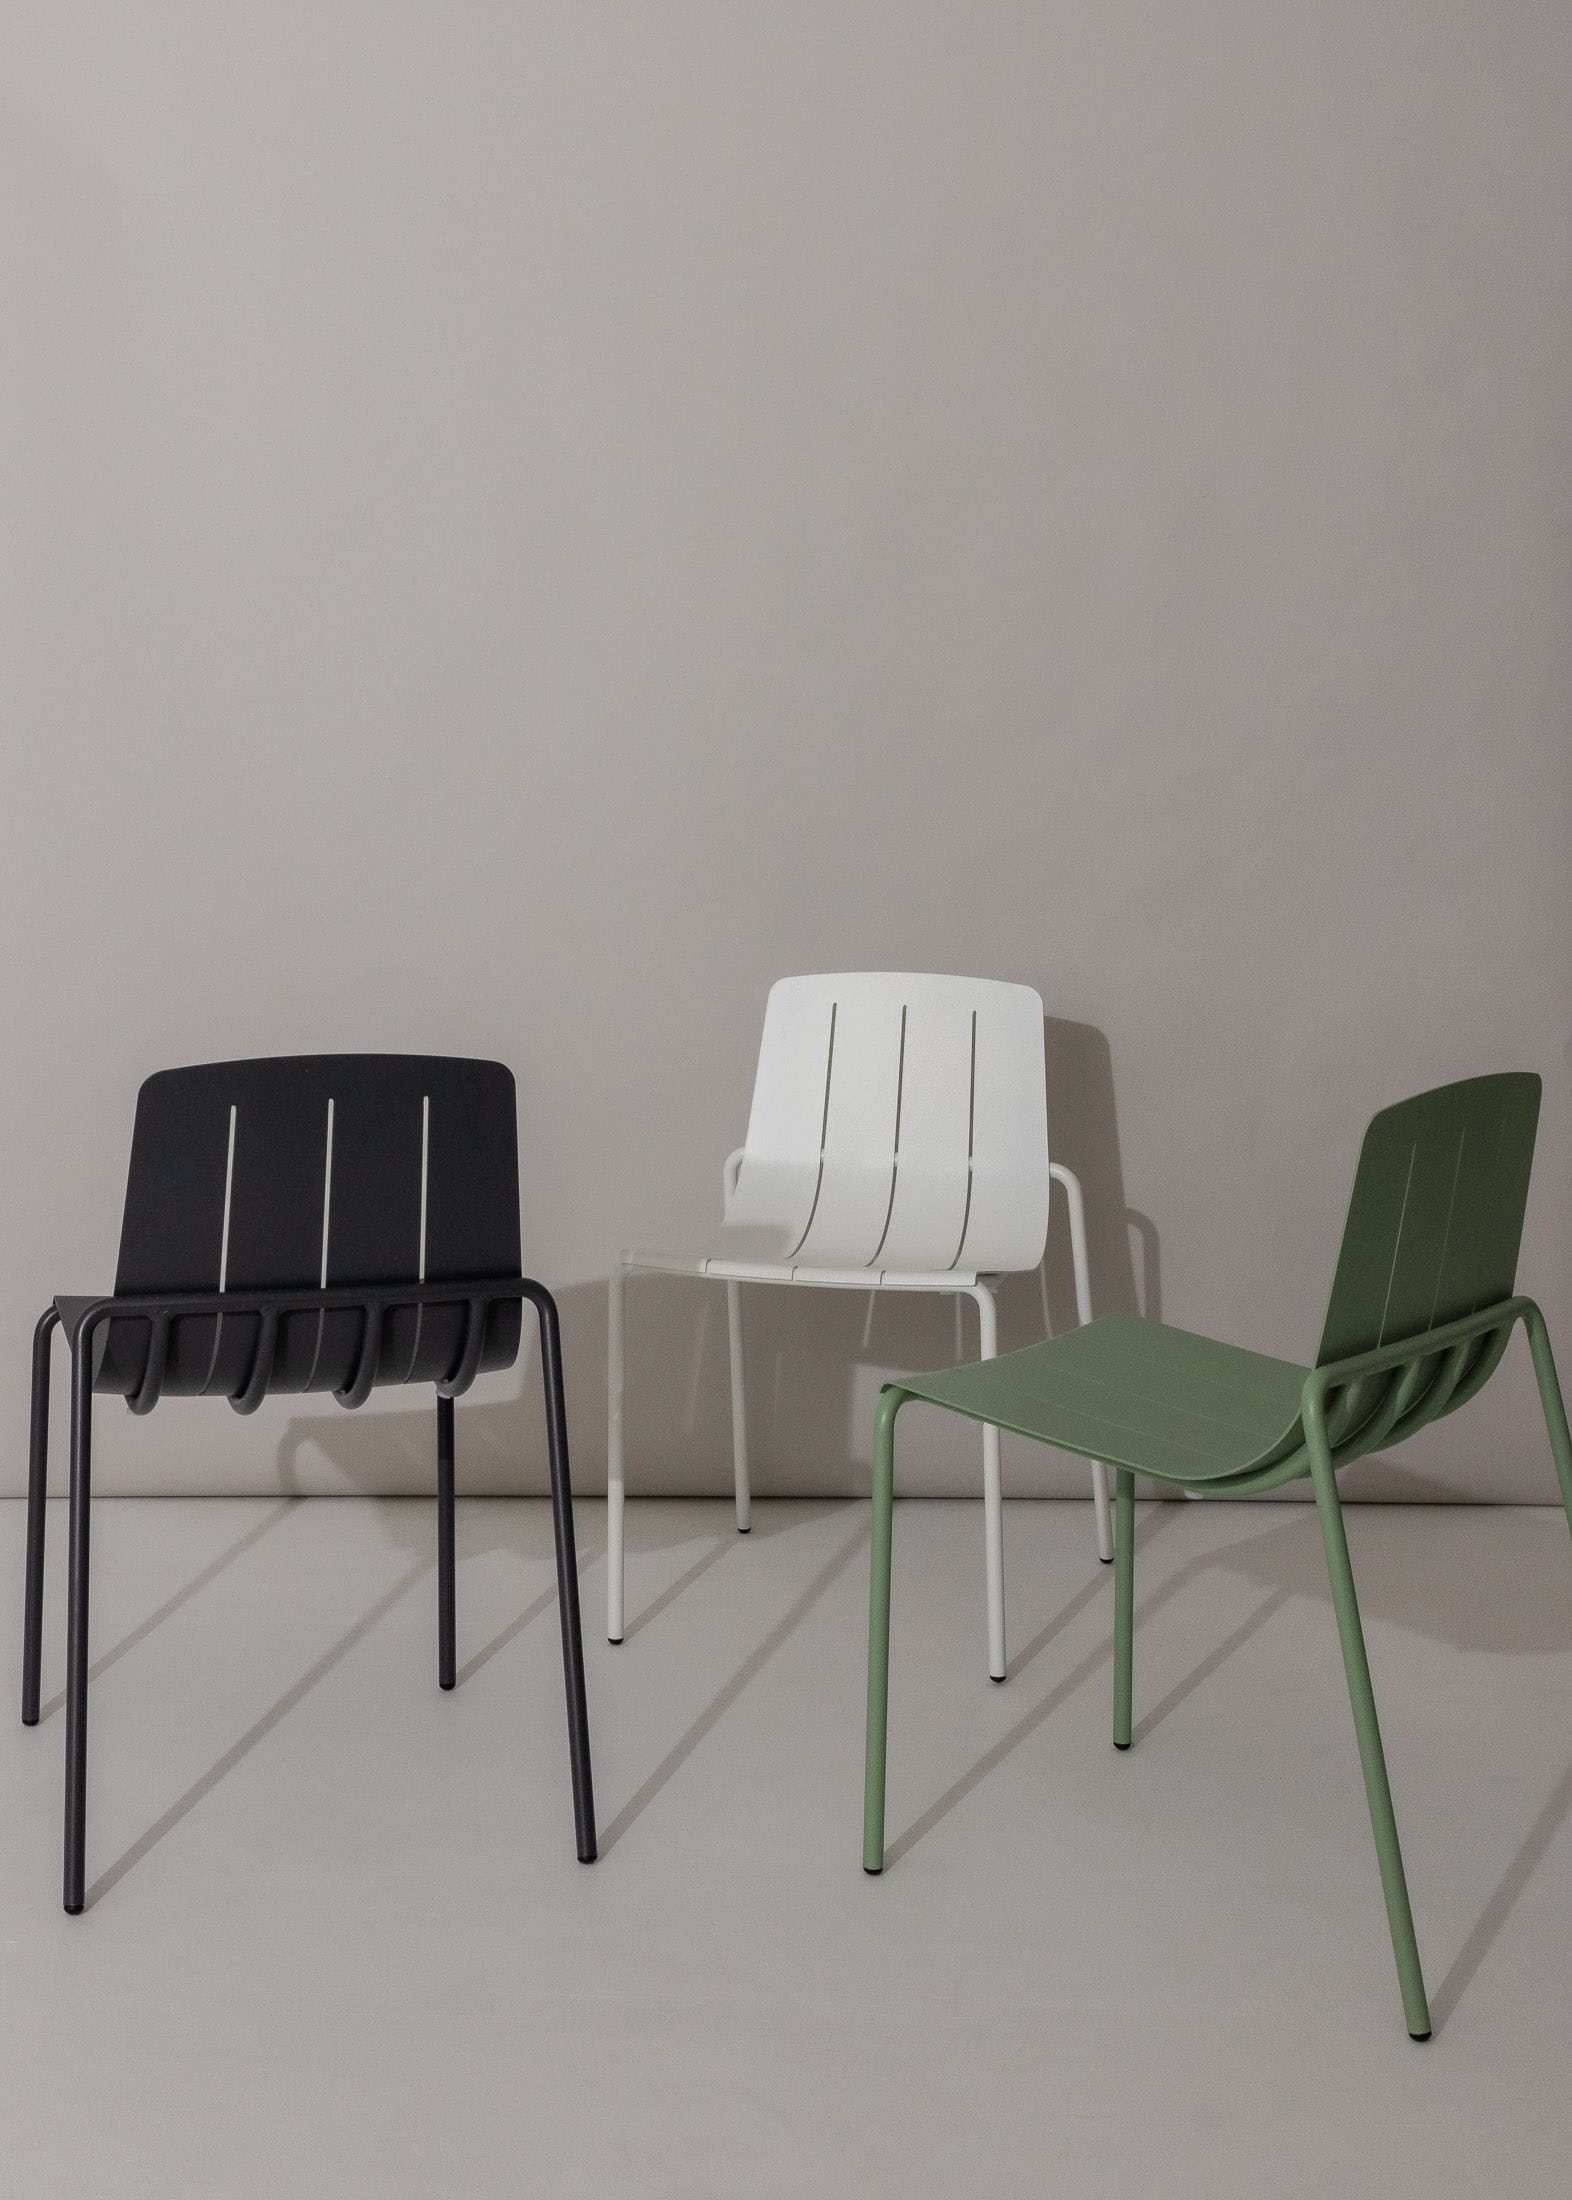 A trio of sleek outdoor chairs in a minimalist setting against a neutral background. The chairs have a modern design, with the first being black, the second white, and the third in a muted green, all with slender metal legs.